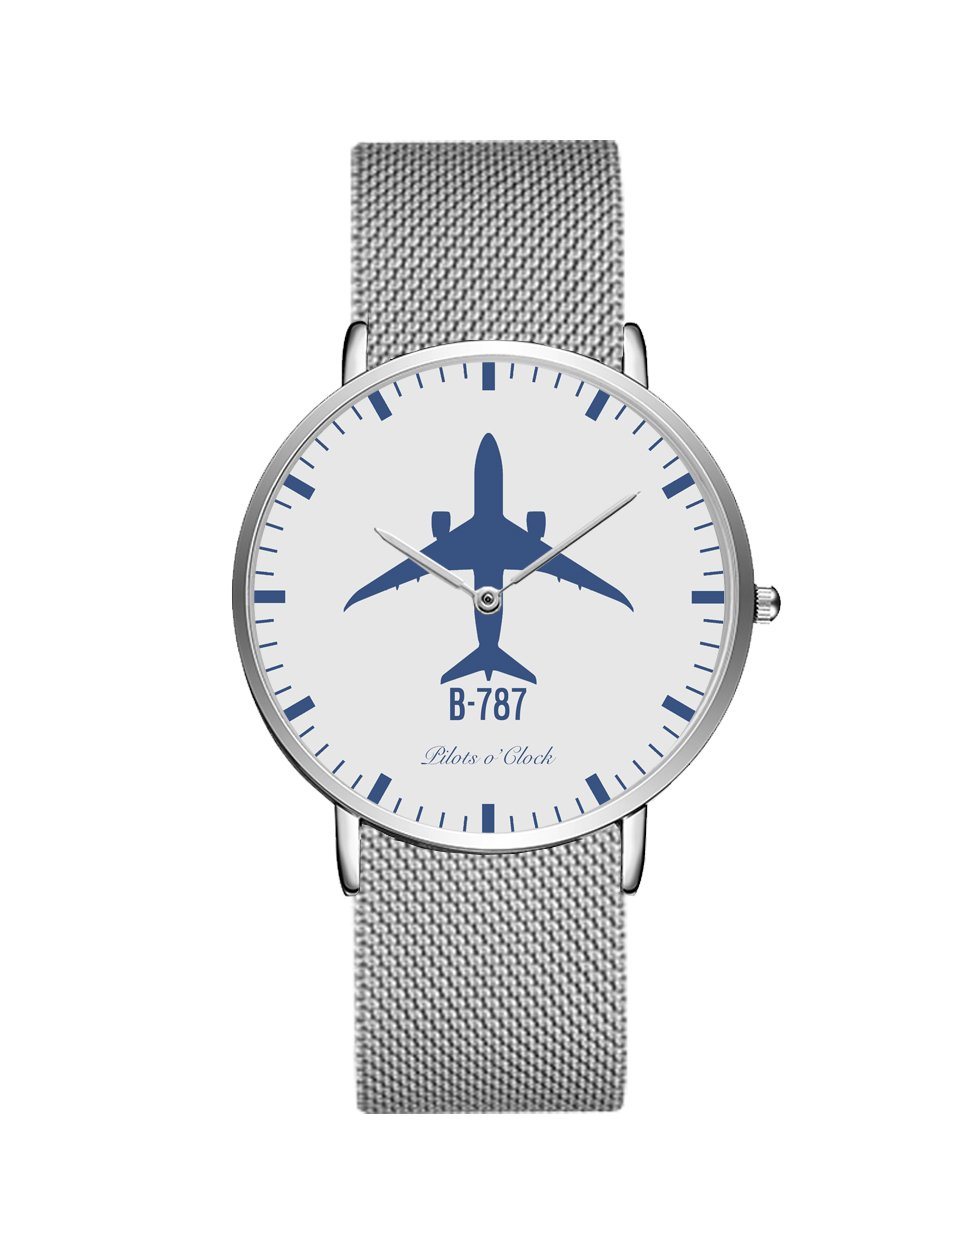 Boeing 787 Stainless Steel Strap Watches Pilot Eyes Store Silver & Silver Stainless Steel Strap 